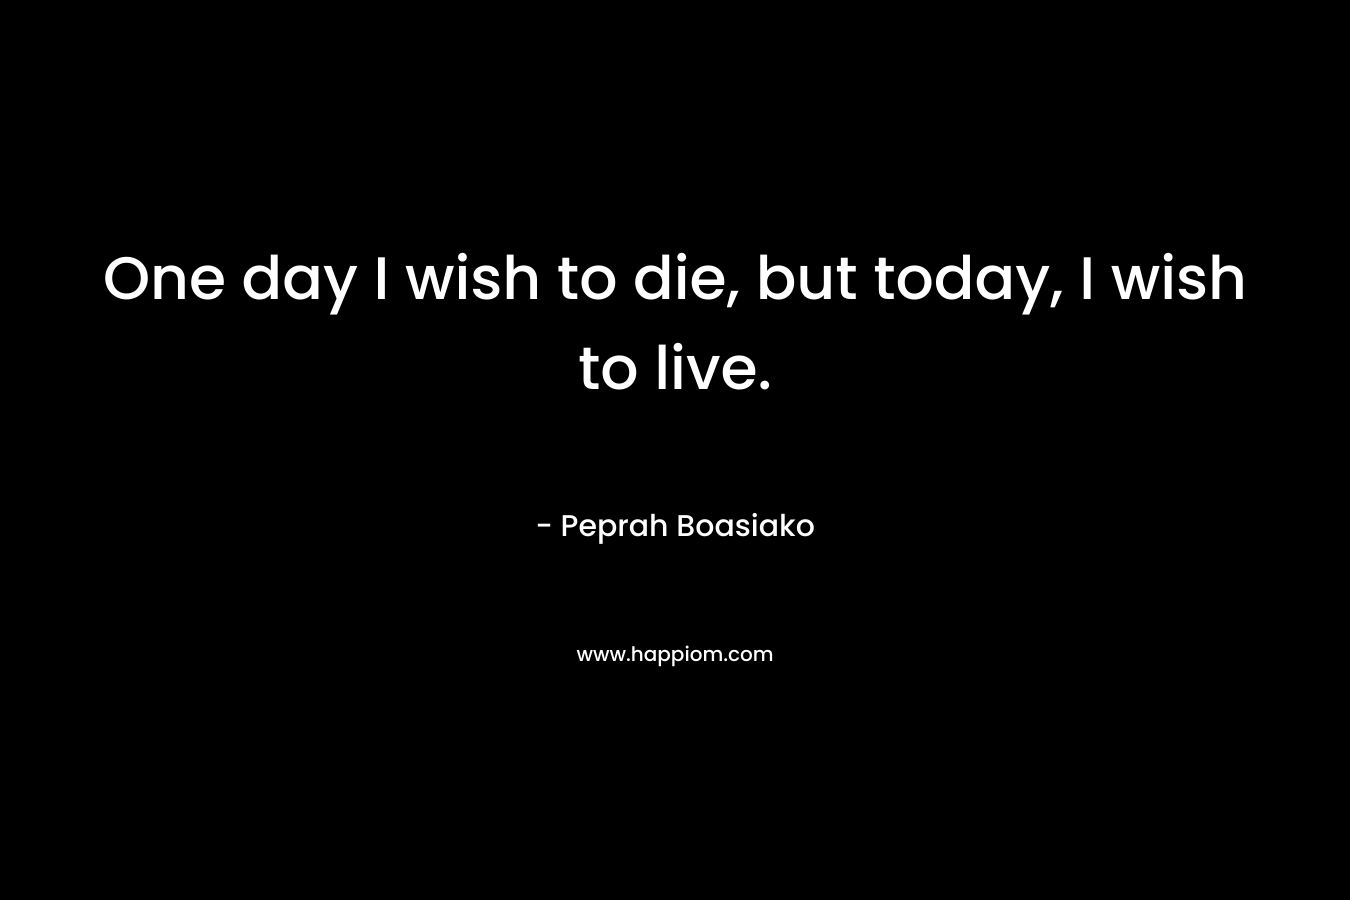 One day I wish to die, but today, I wish to live.